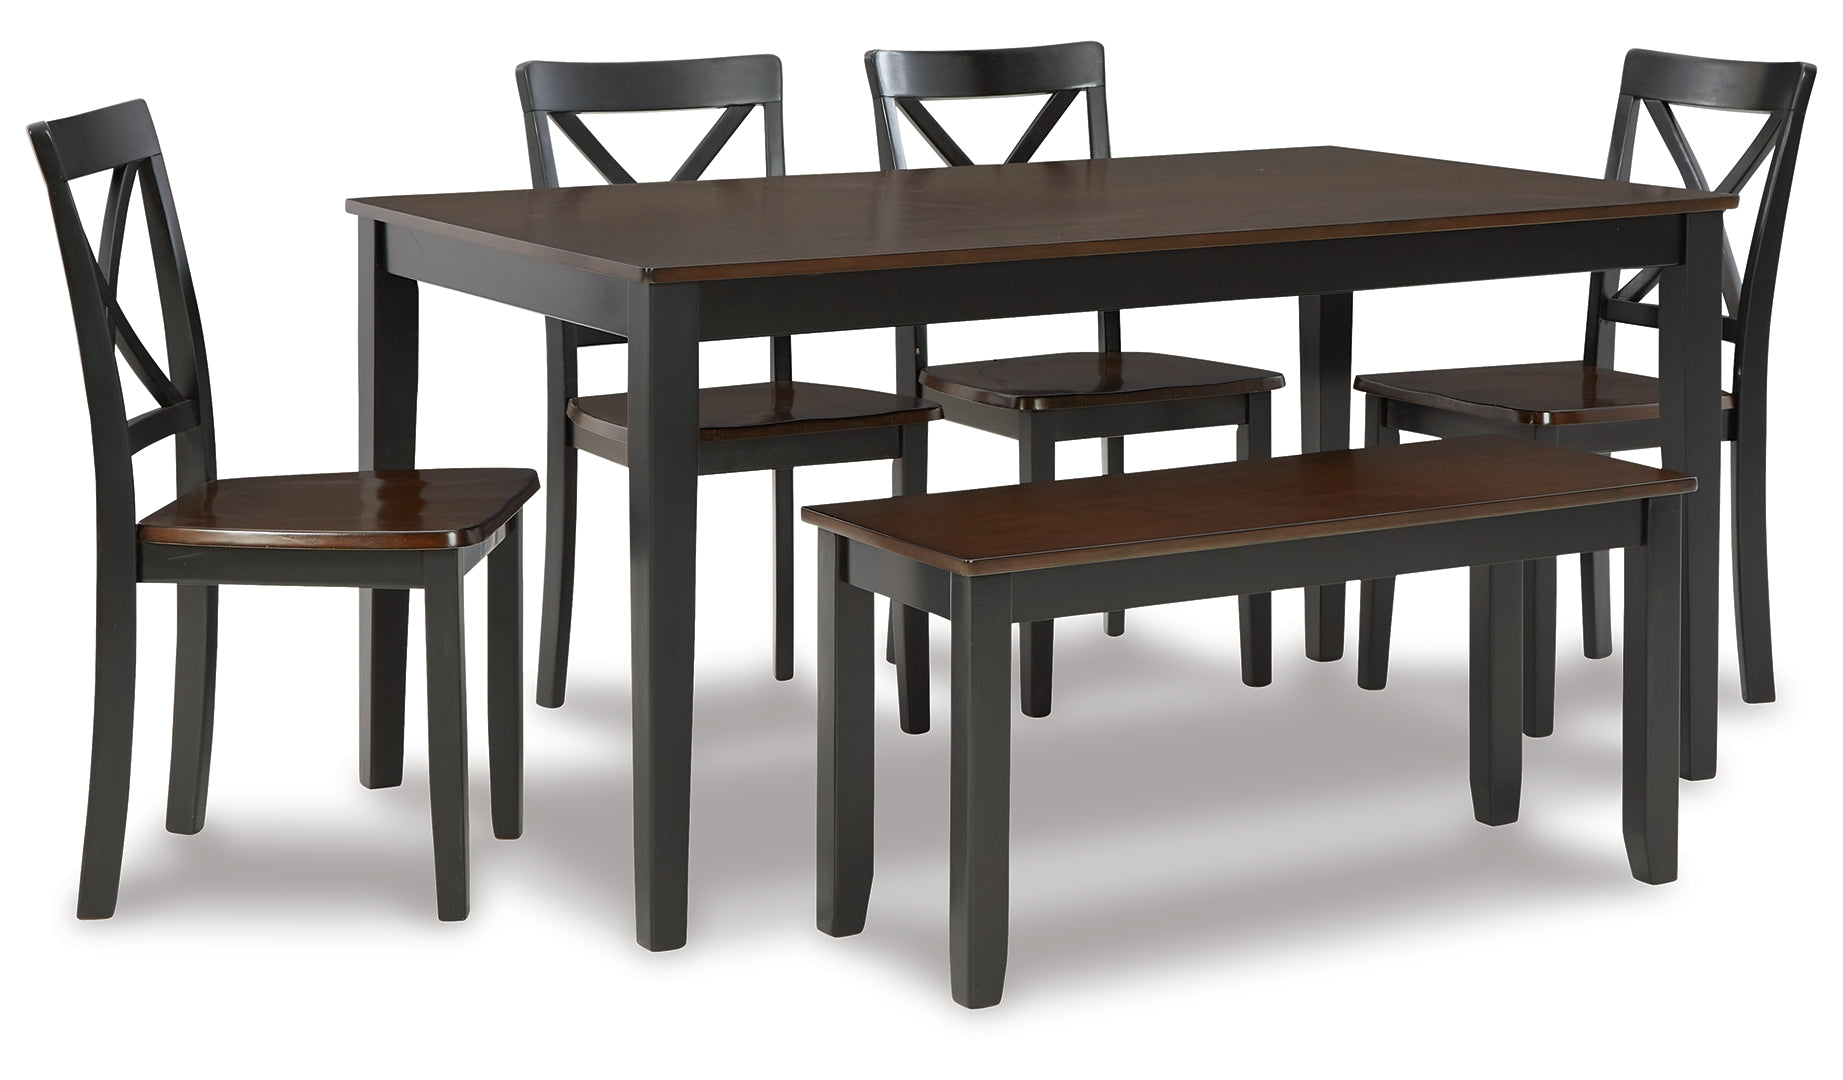 Larsondale Dining Table and Chairs with Bench (Set of 6)